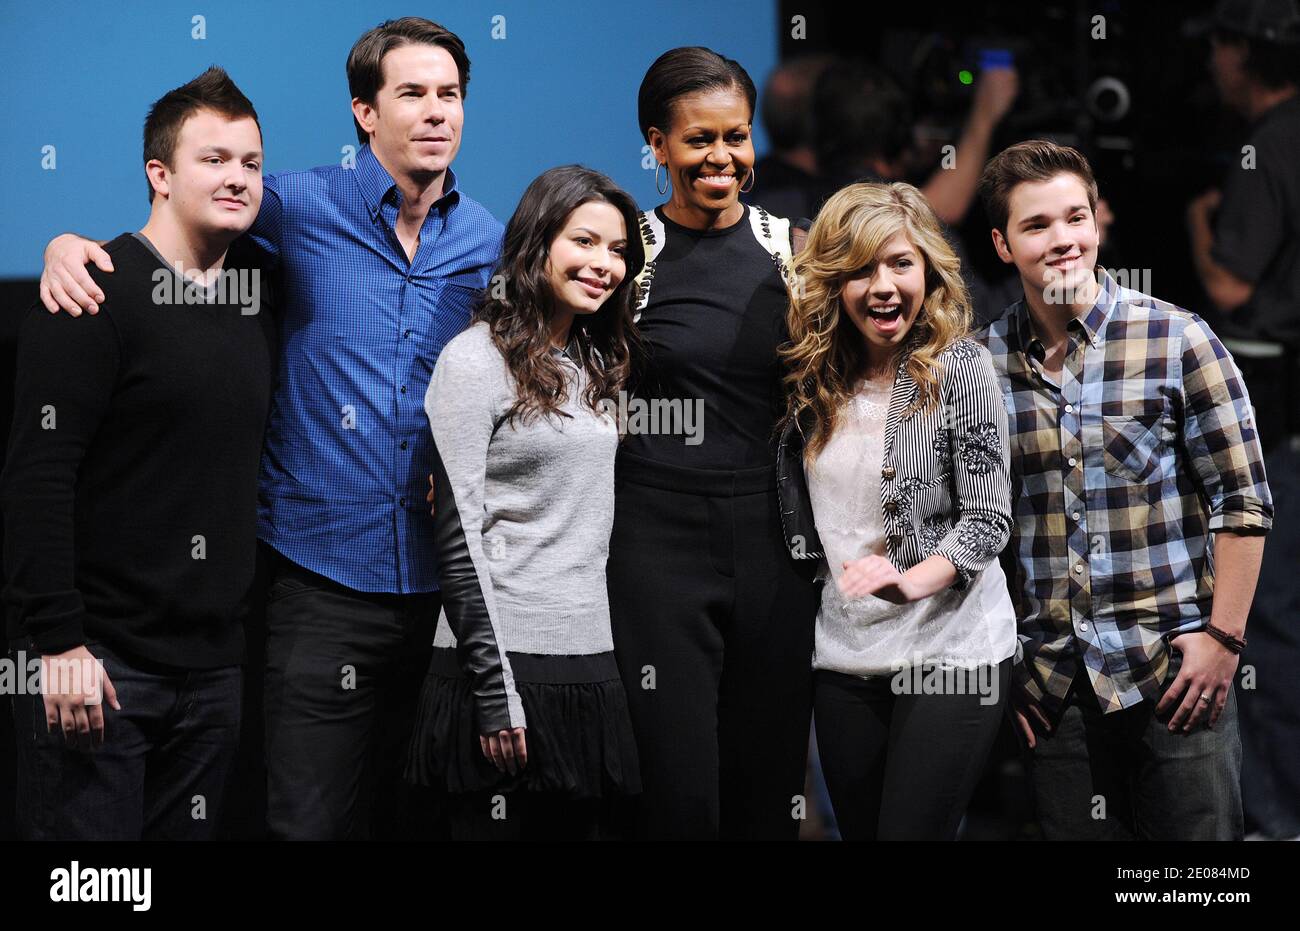 First Lady Michelle Obama poses for photos alongside cast members of the Nickelodeon television show iCarly, during a screening of an episode of the show featuring Obama at Hayfield Secondary School in Alexandria, VA, USA, on January 13, 2012. Obama appears on an episode honoring military families and kids which will air on the children's cable network January 16. Photo by Olivier Douliery/ABACAPRESS.COM Stock Photo